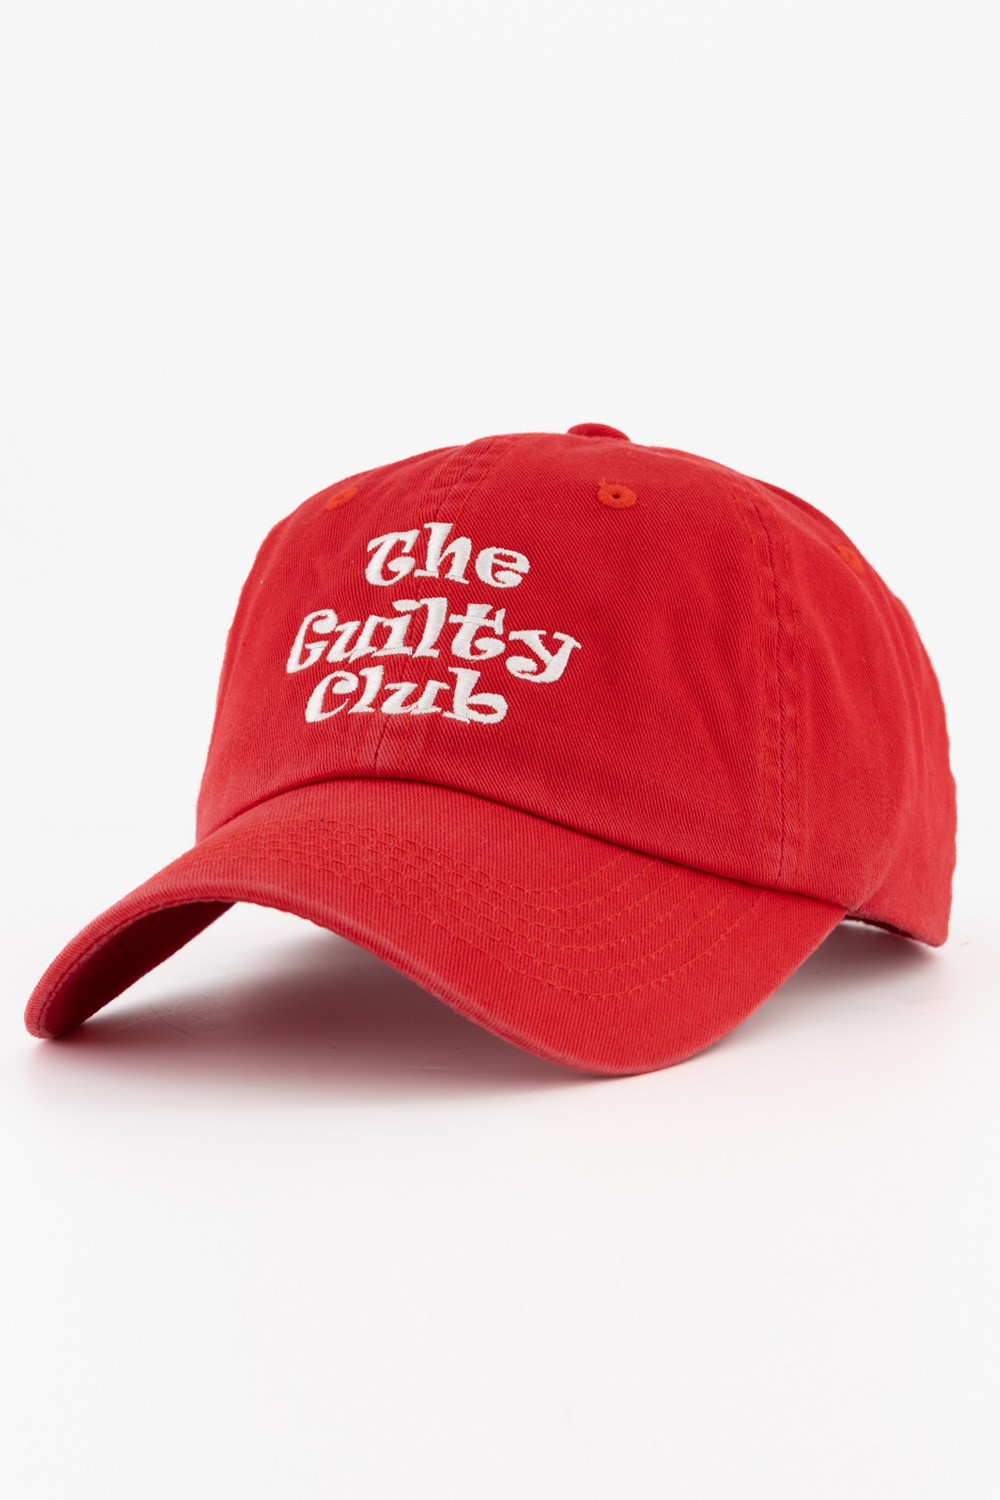 THE GUILTY CLUB  Ball Cap Red